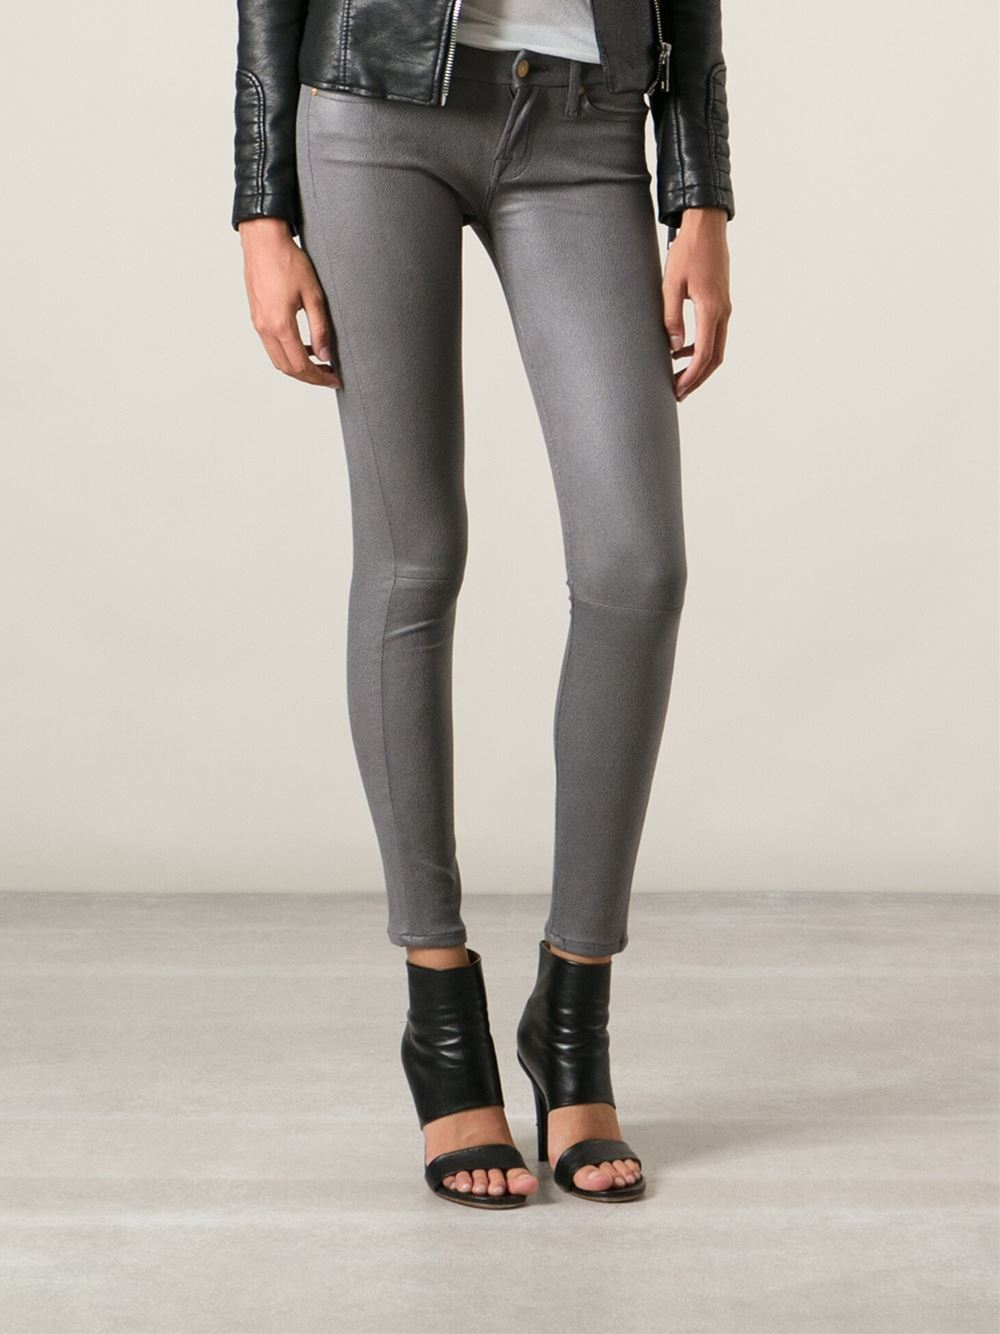 7 For All Mankind Coated Skinny Jeans in Grey (Grey) - Lyst